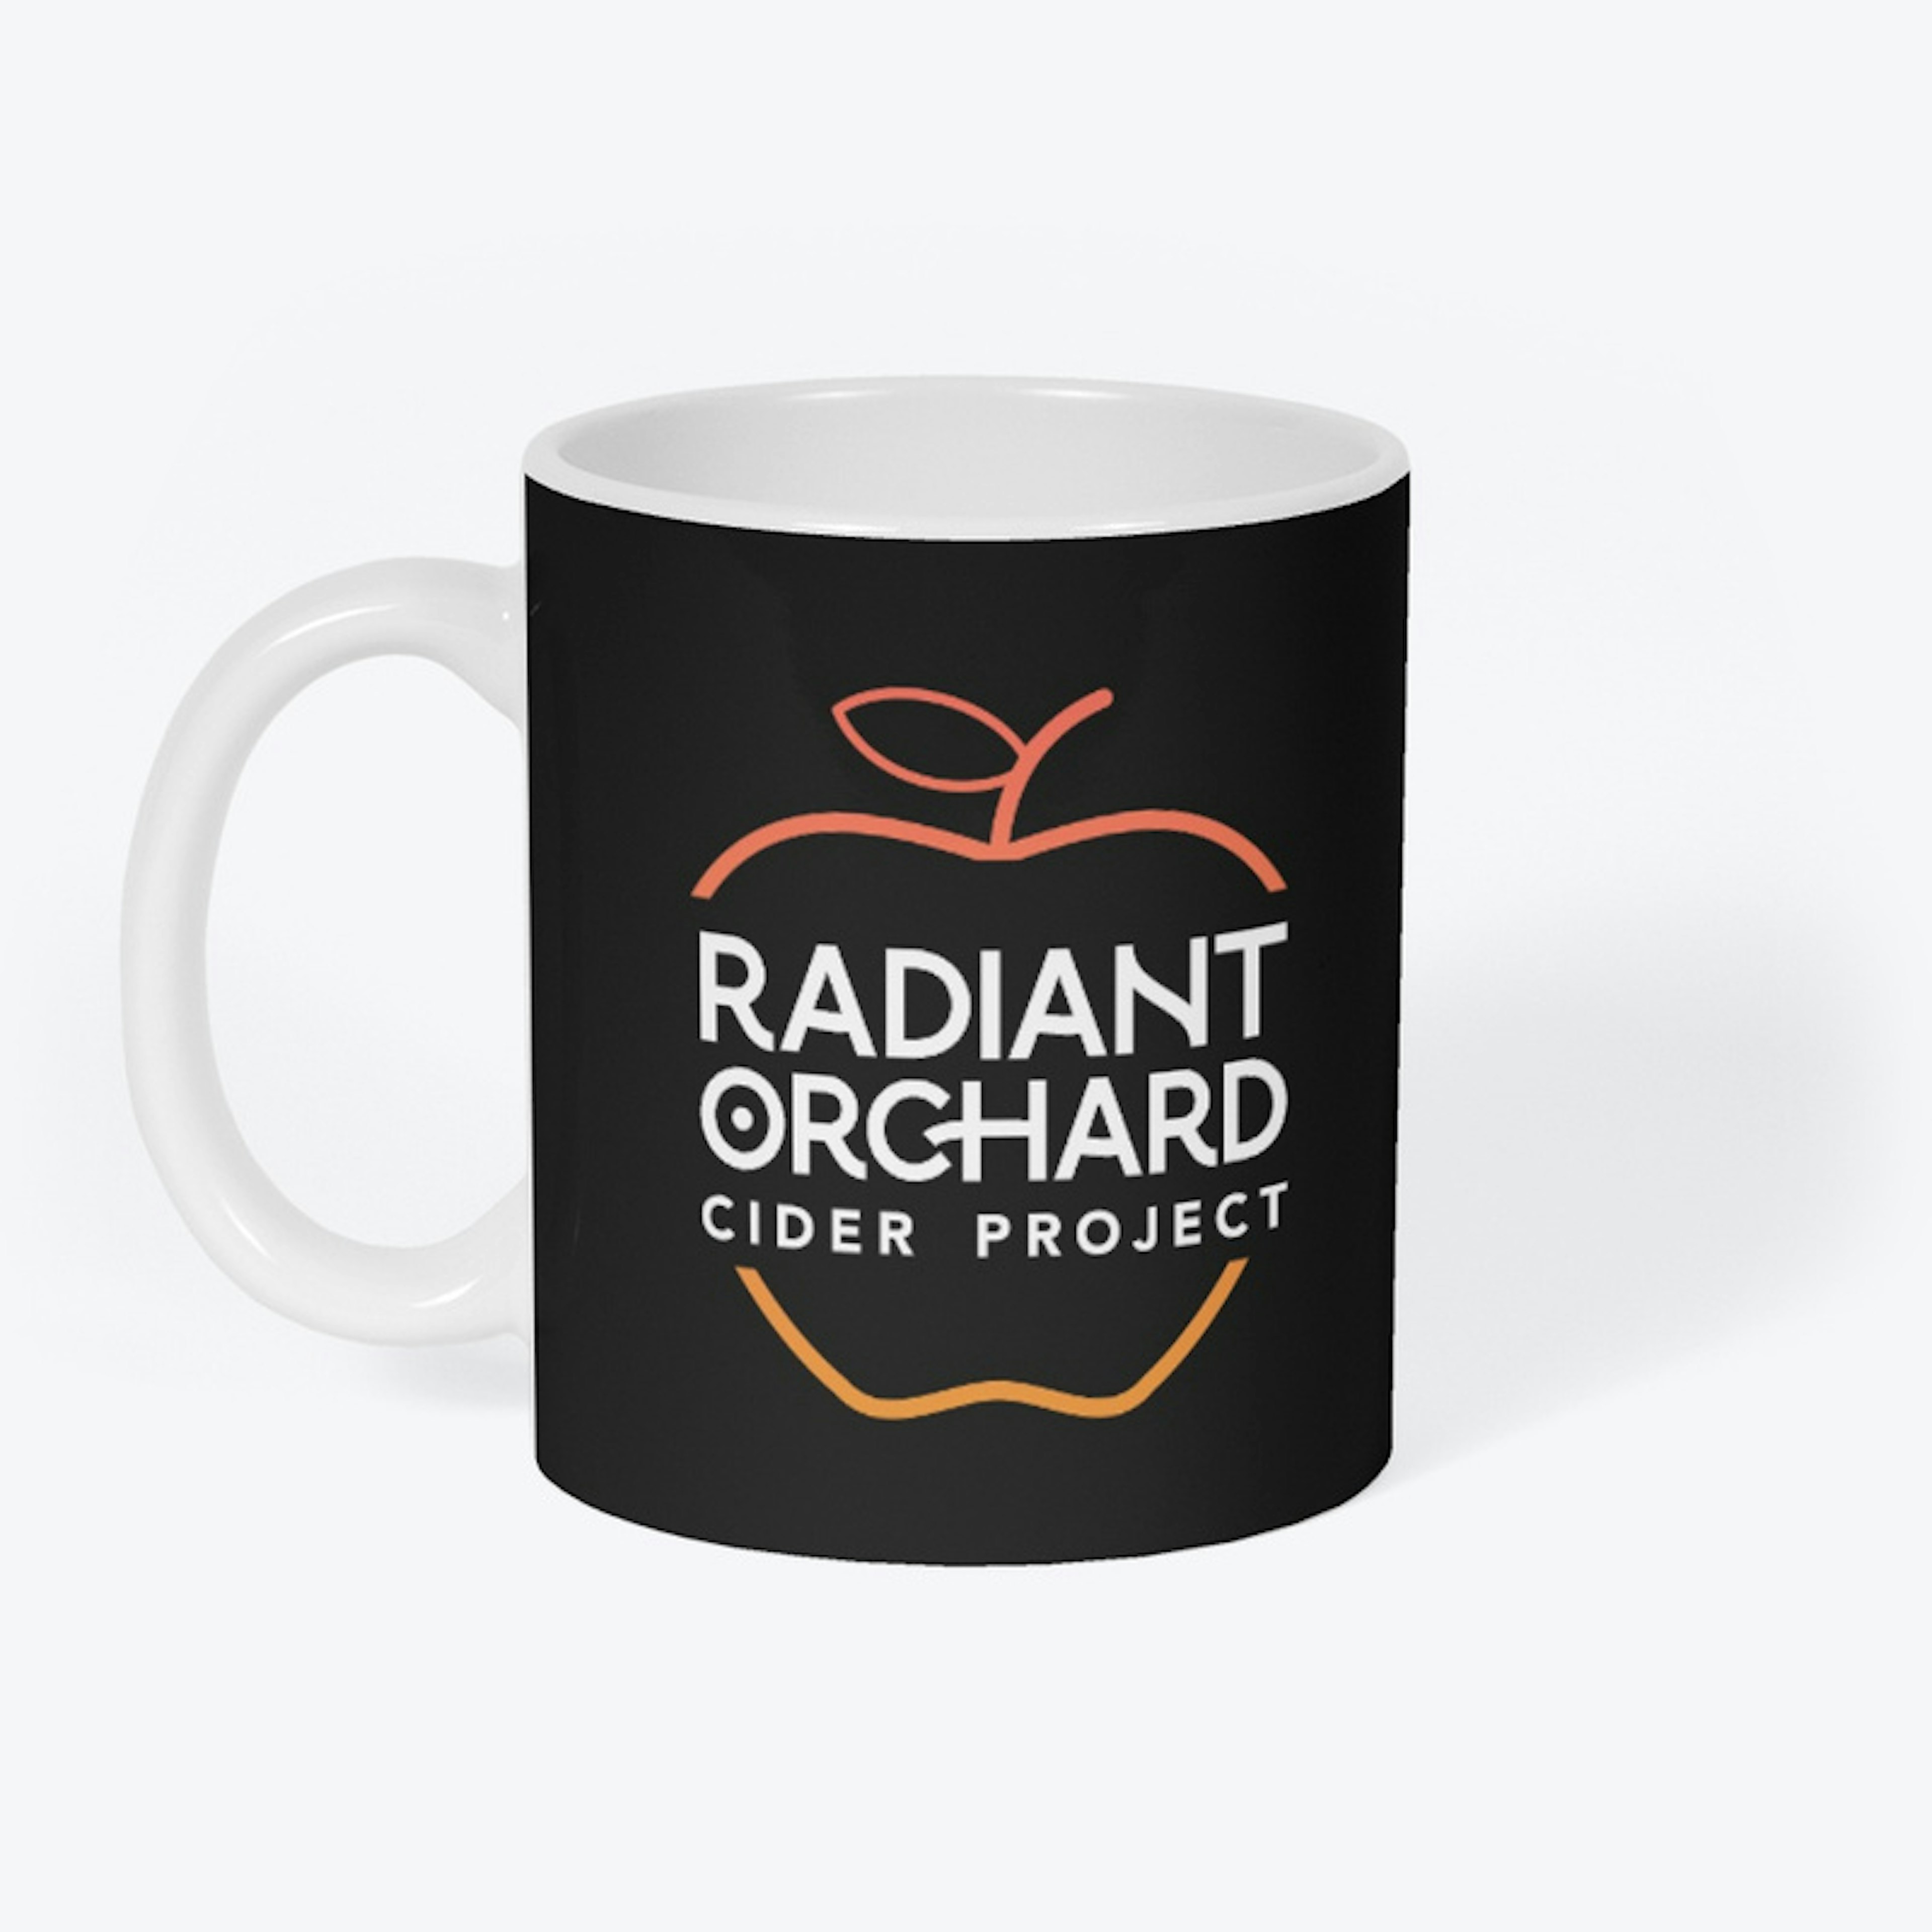 Radiant Orchard Cider Project